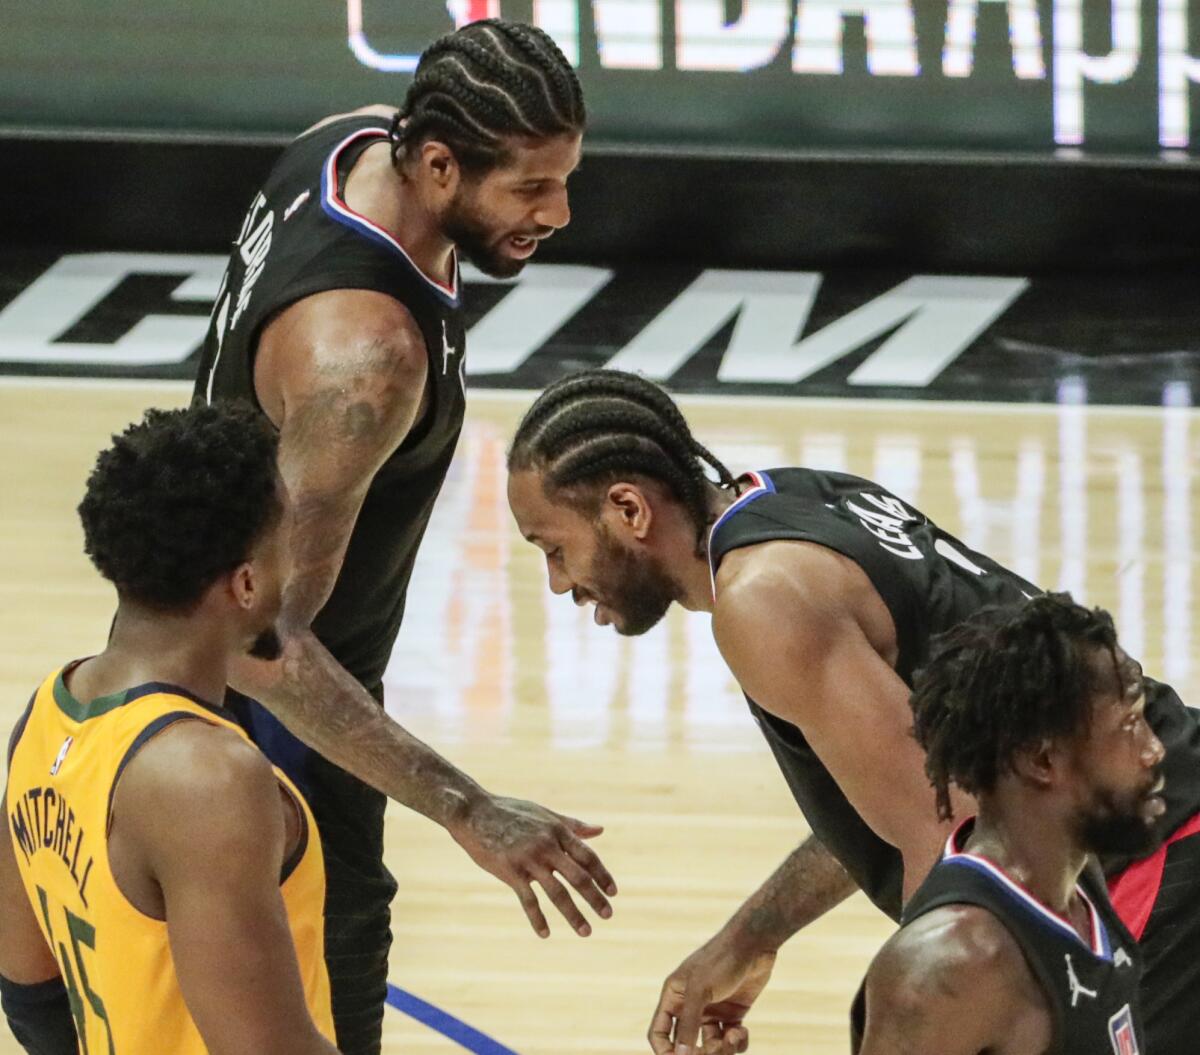 The Clippers' Kawhi Leonard is in pain as teammate Paul George checks on him during Game 4 against the Jazz.